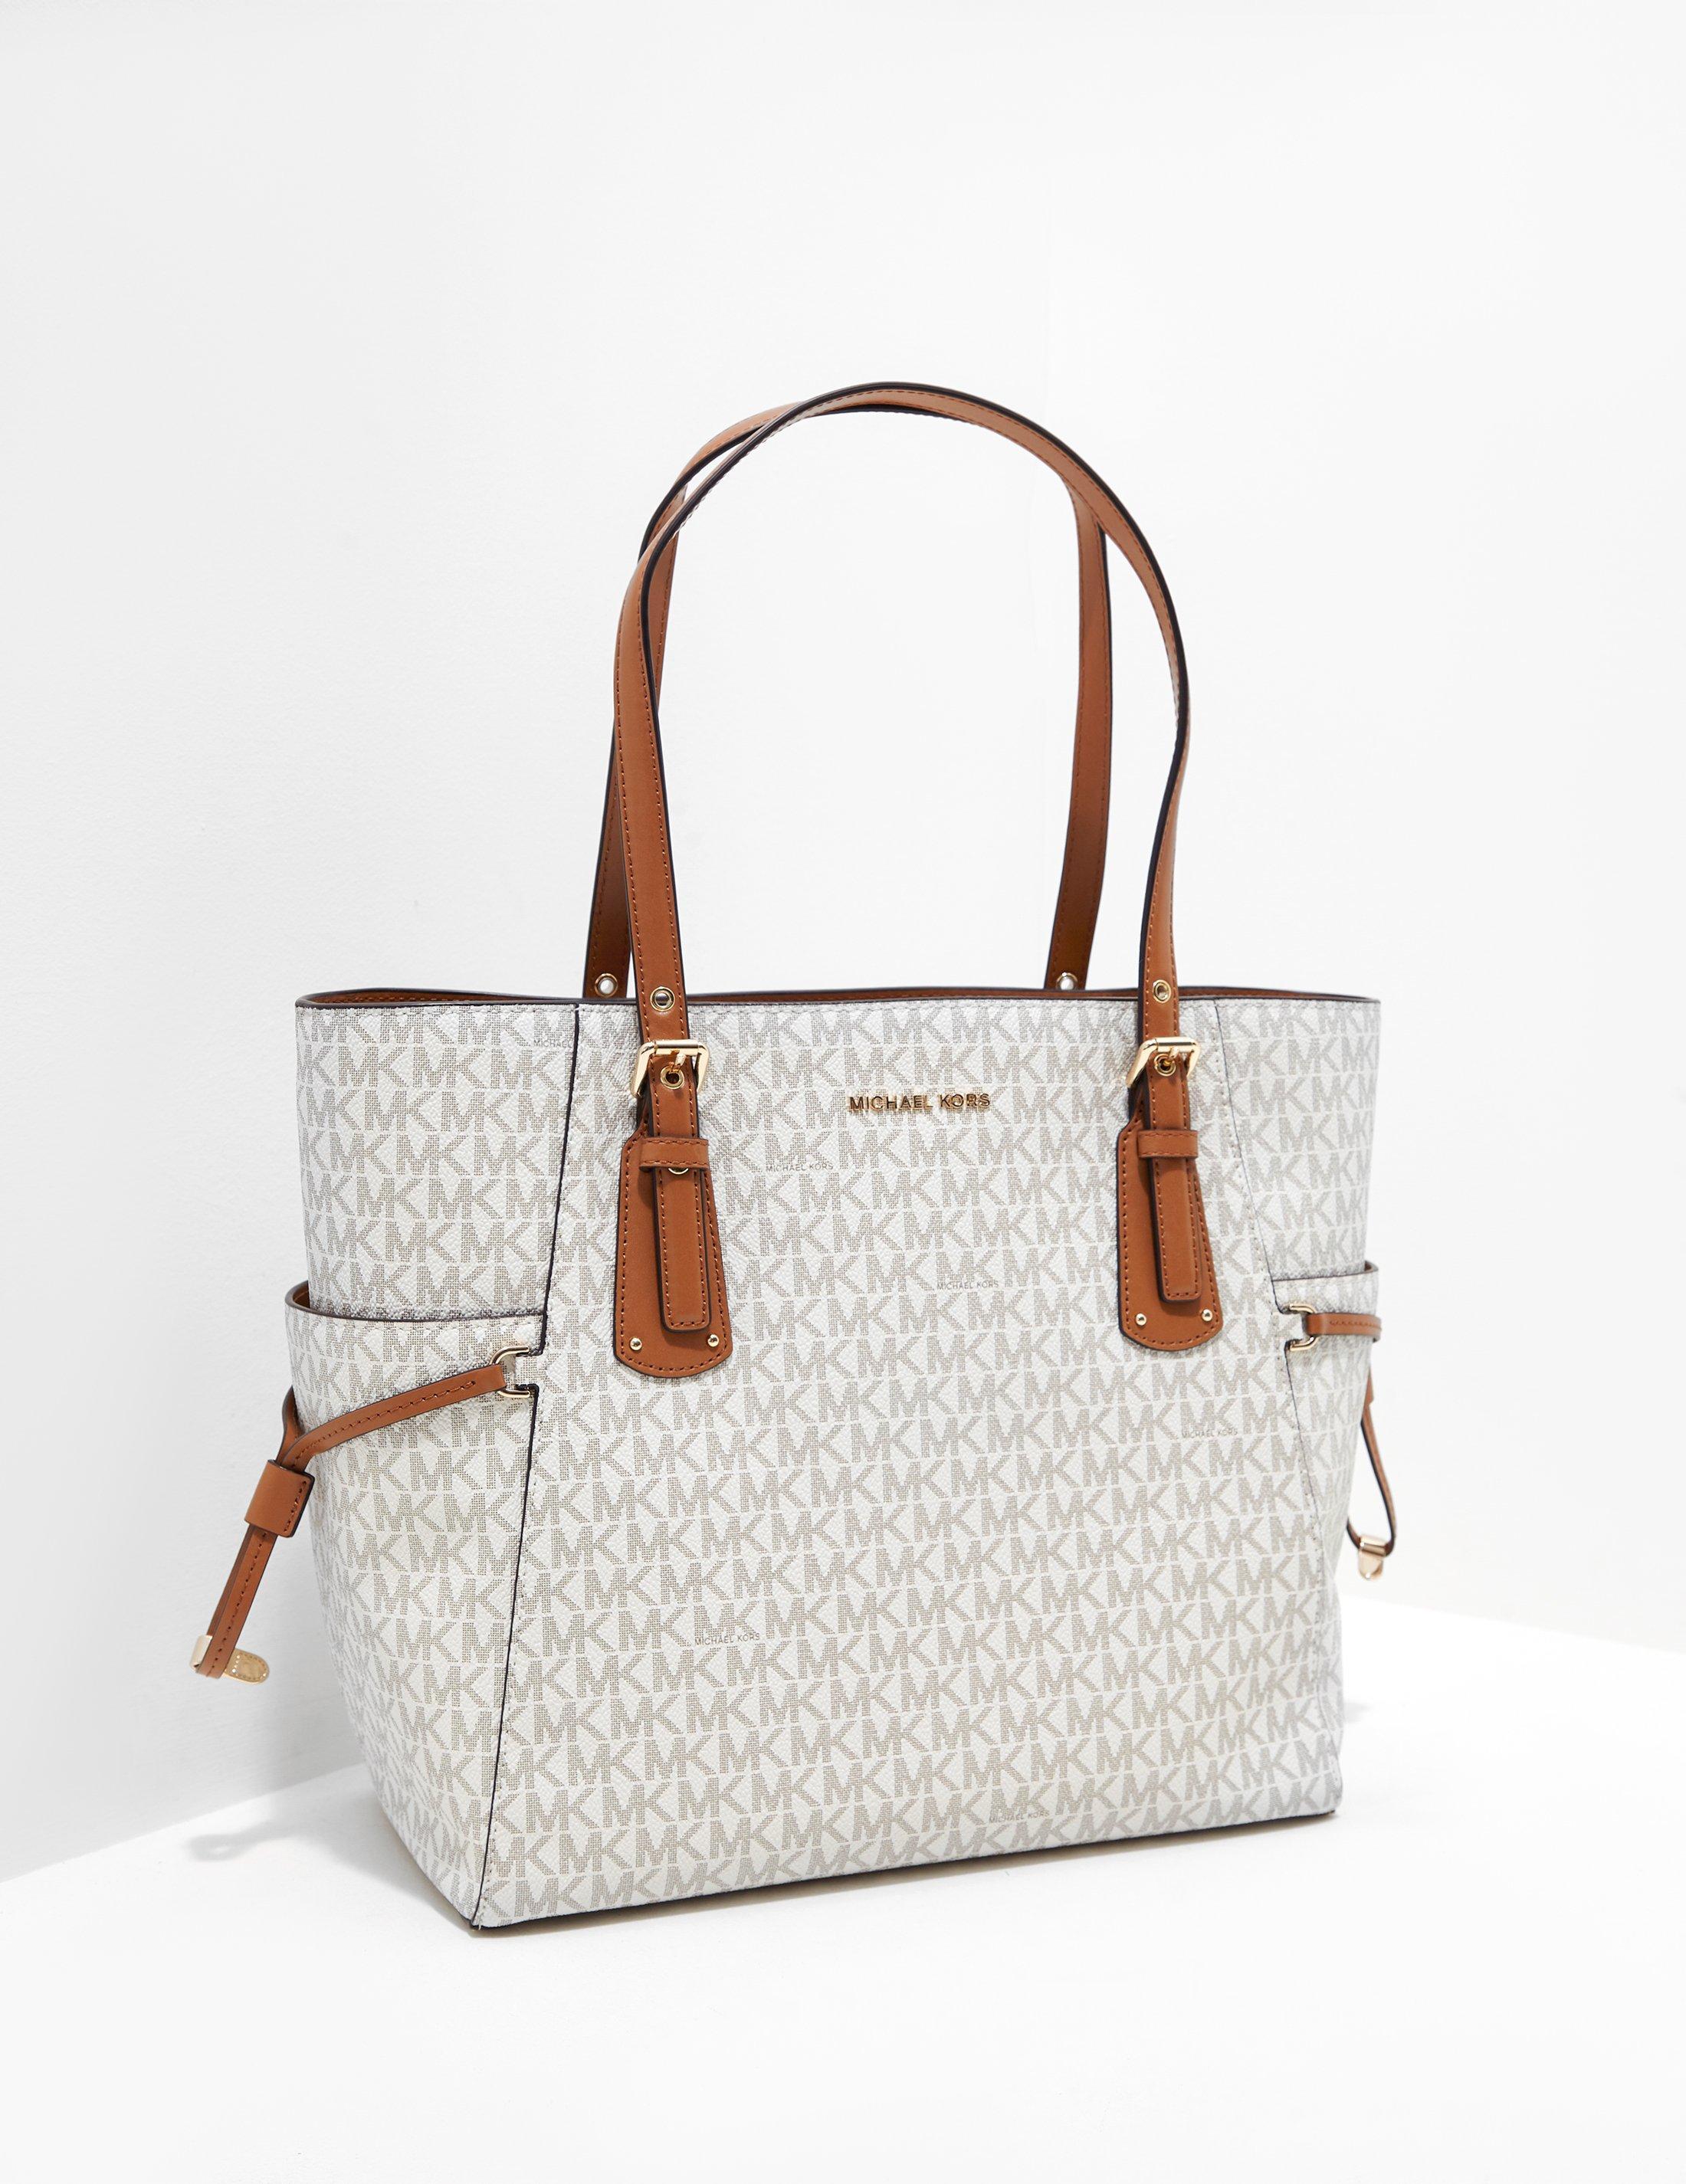 Michael Kors Purses Sale Uk | Stanford Center for Opportunity Policy in